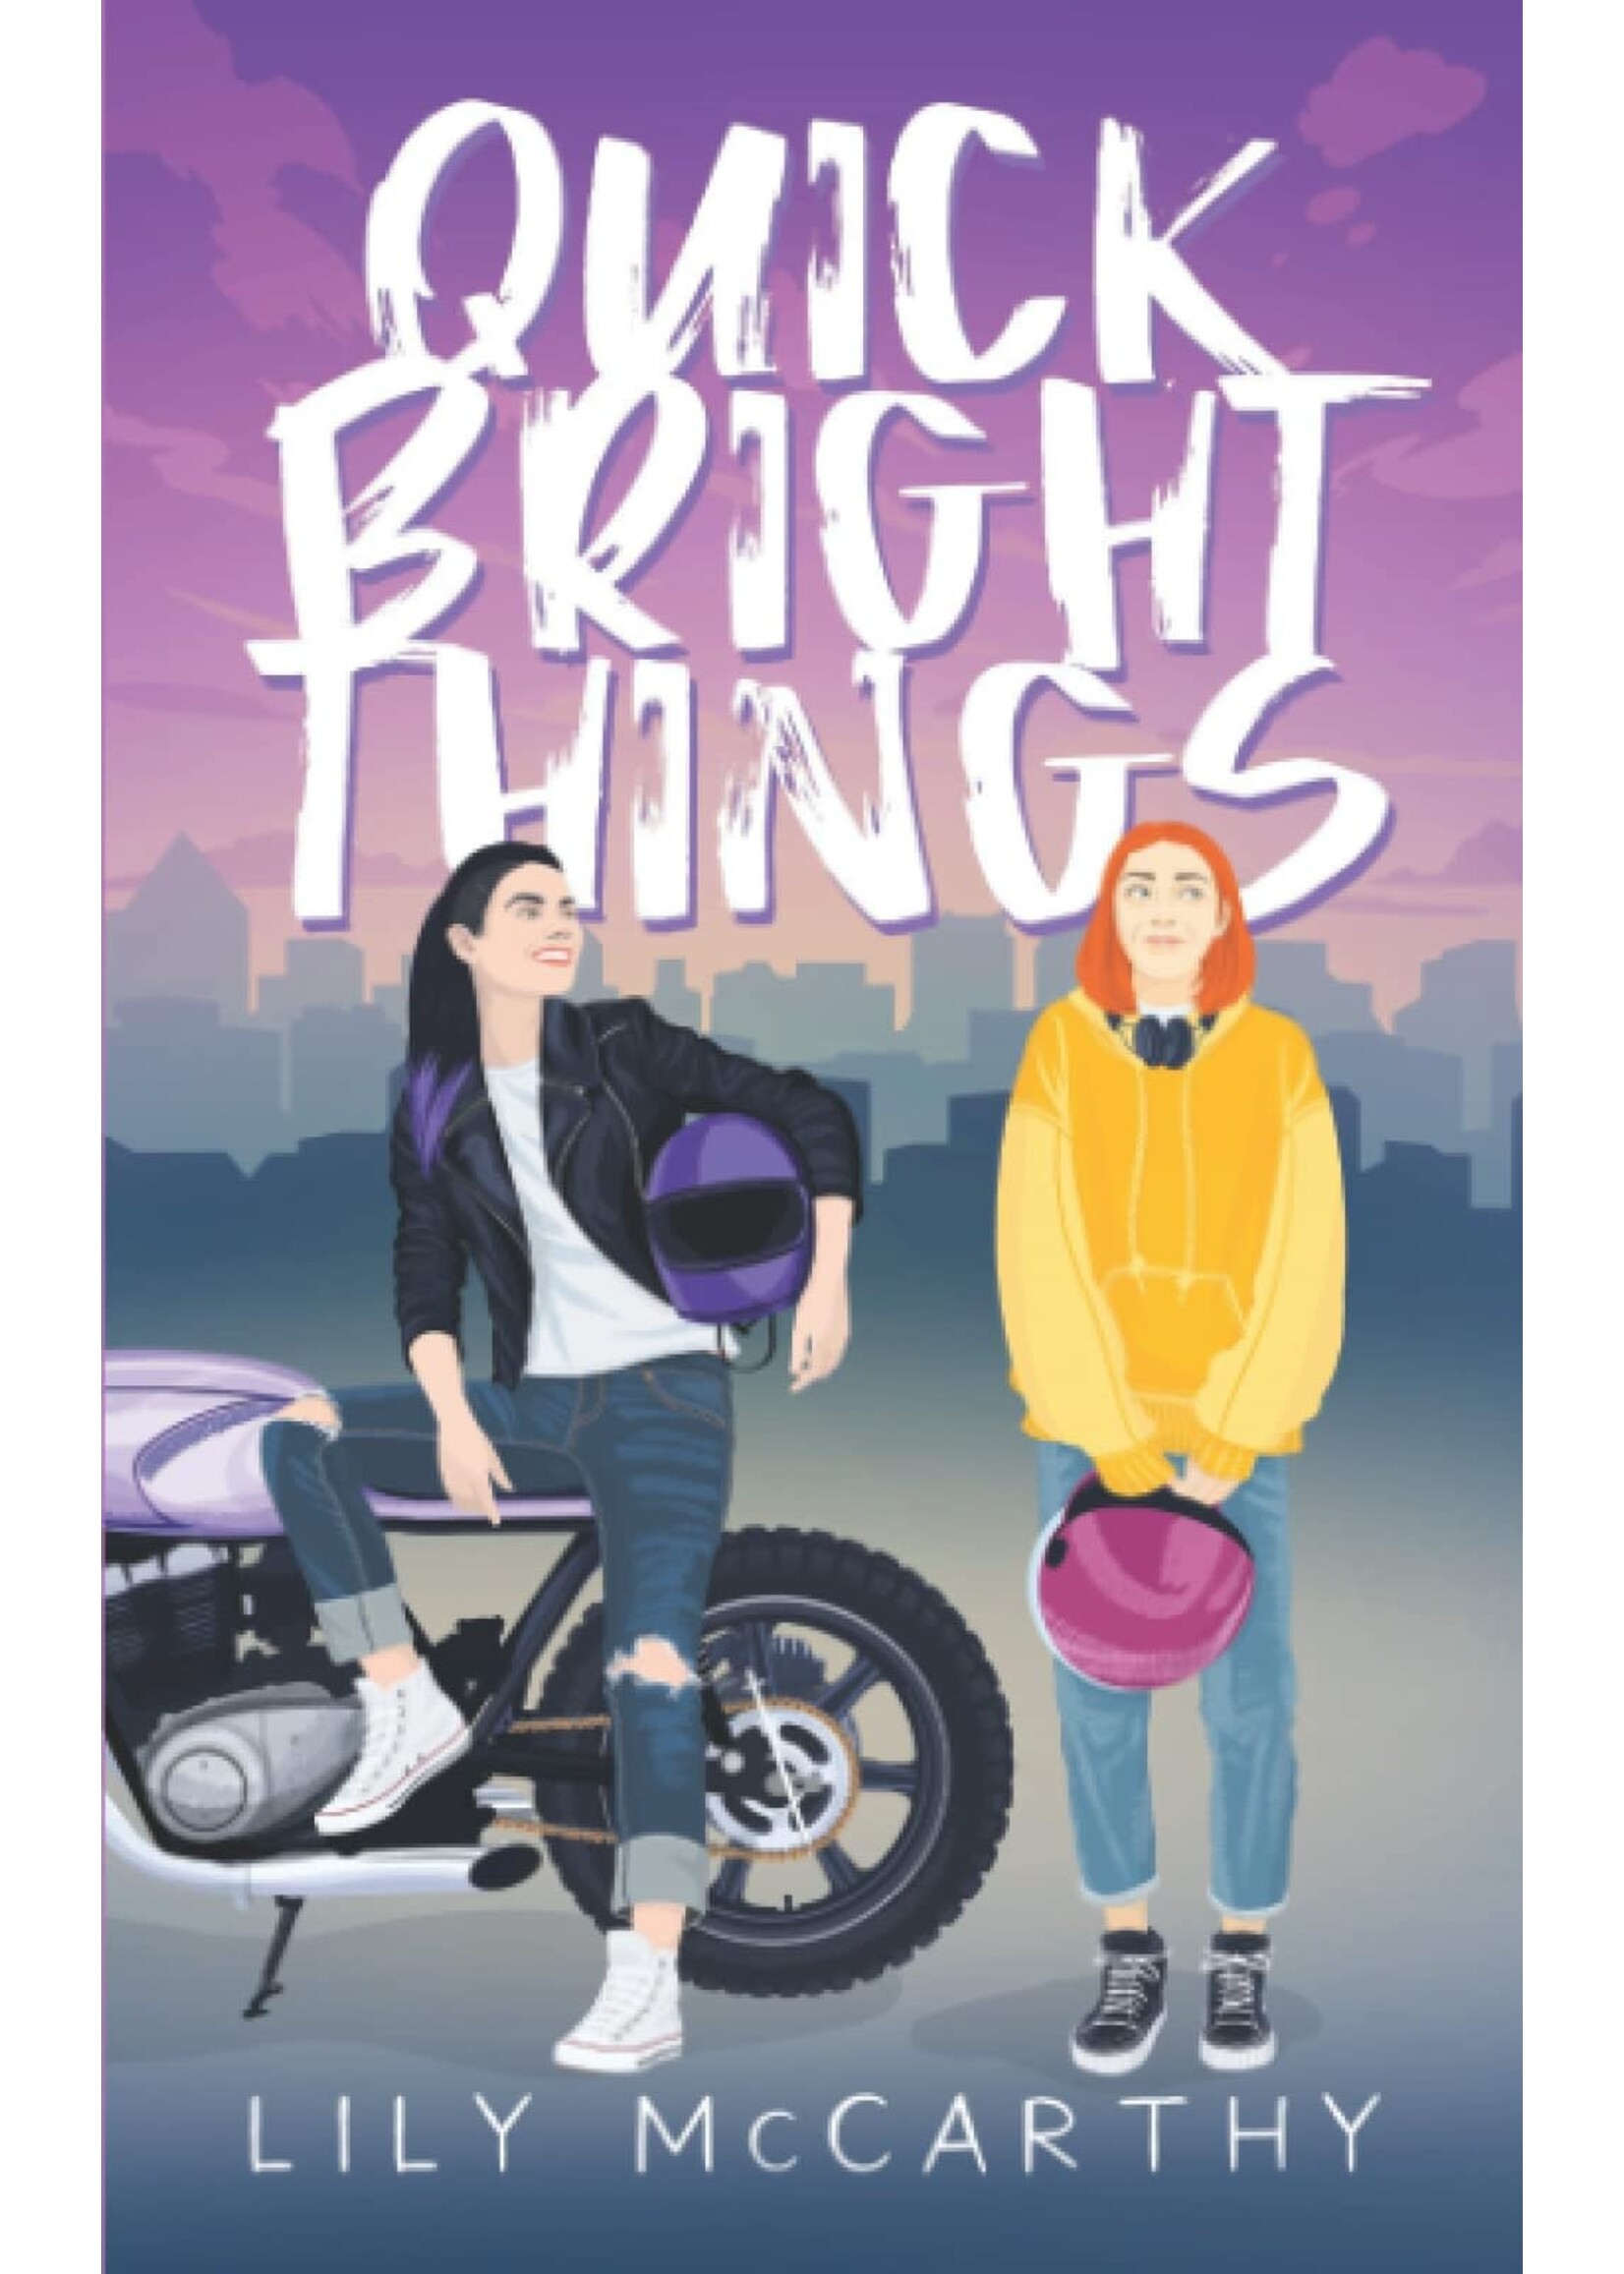 Quick Bright Things by Lily McCarthy